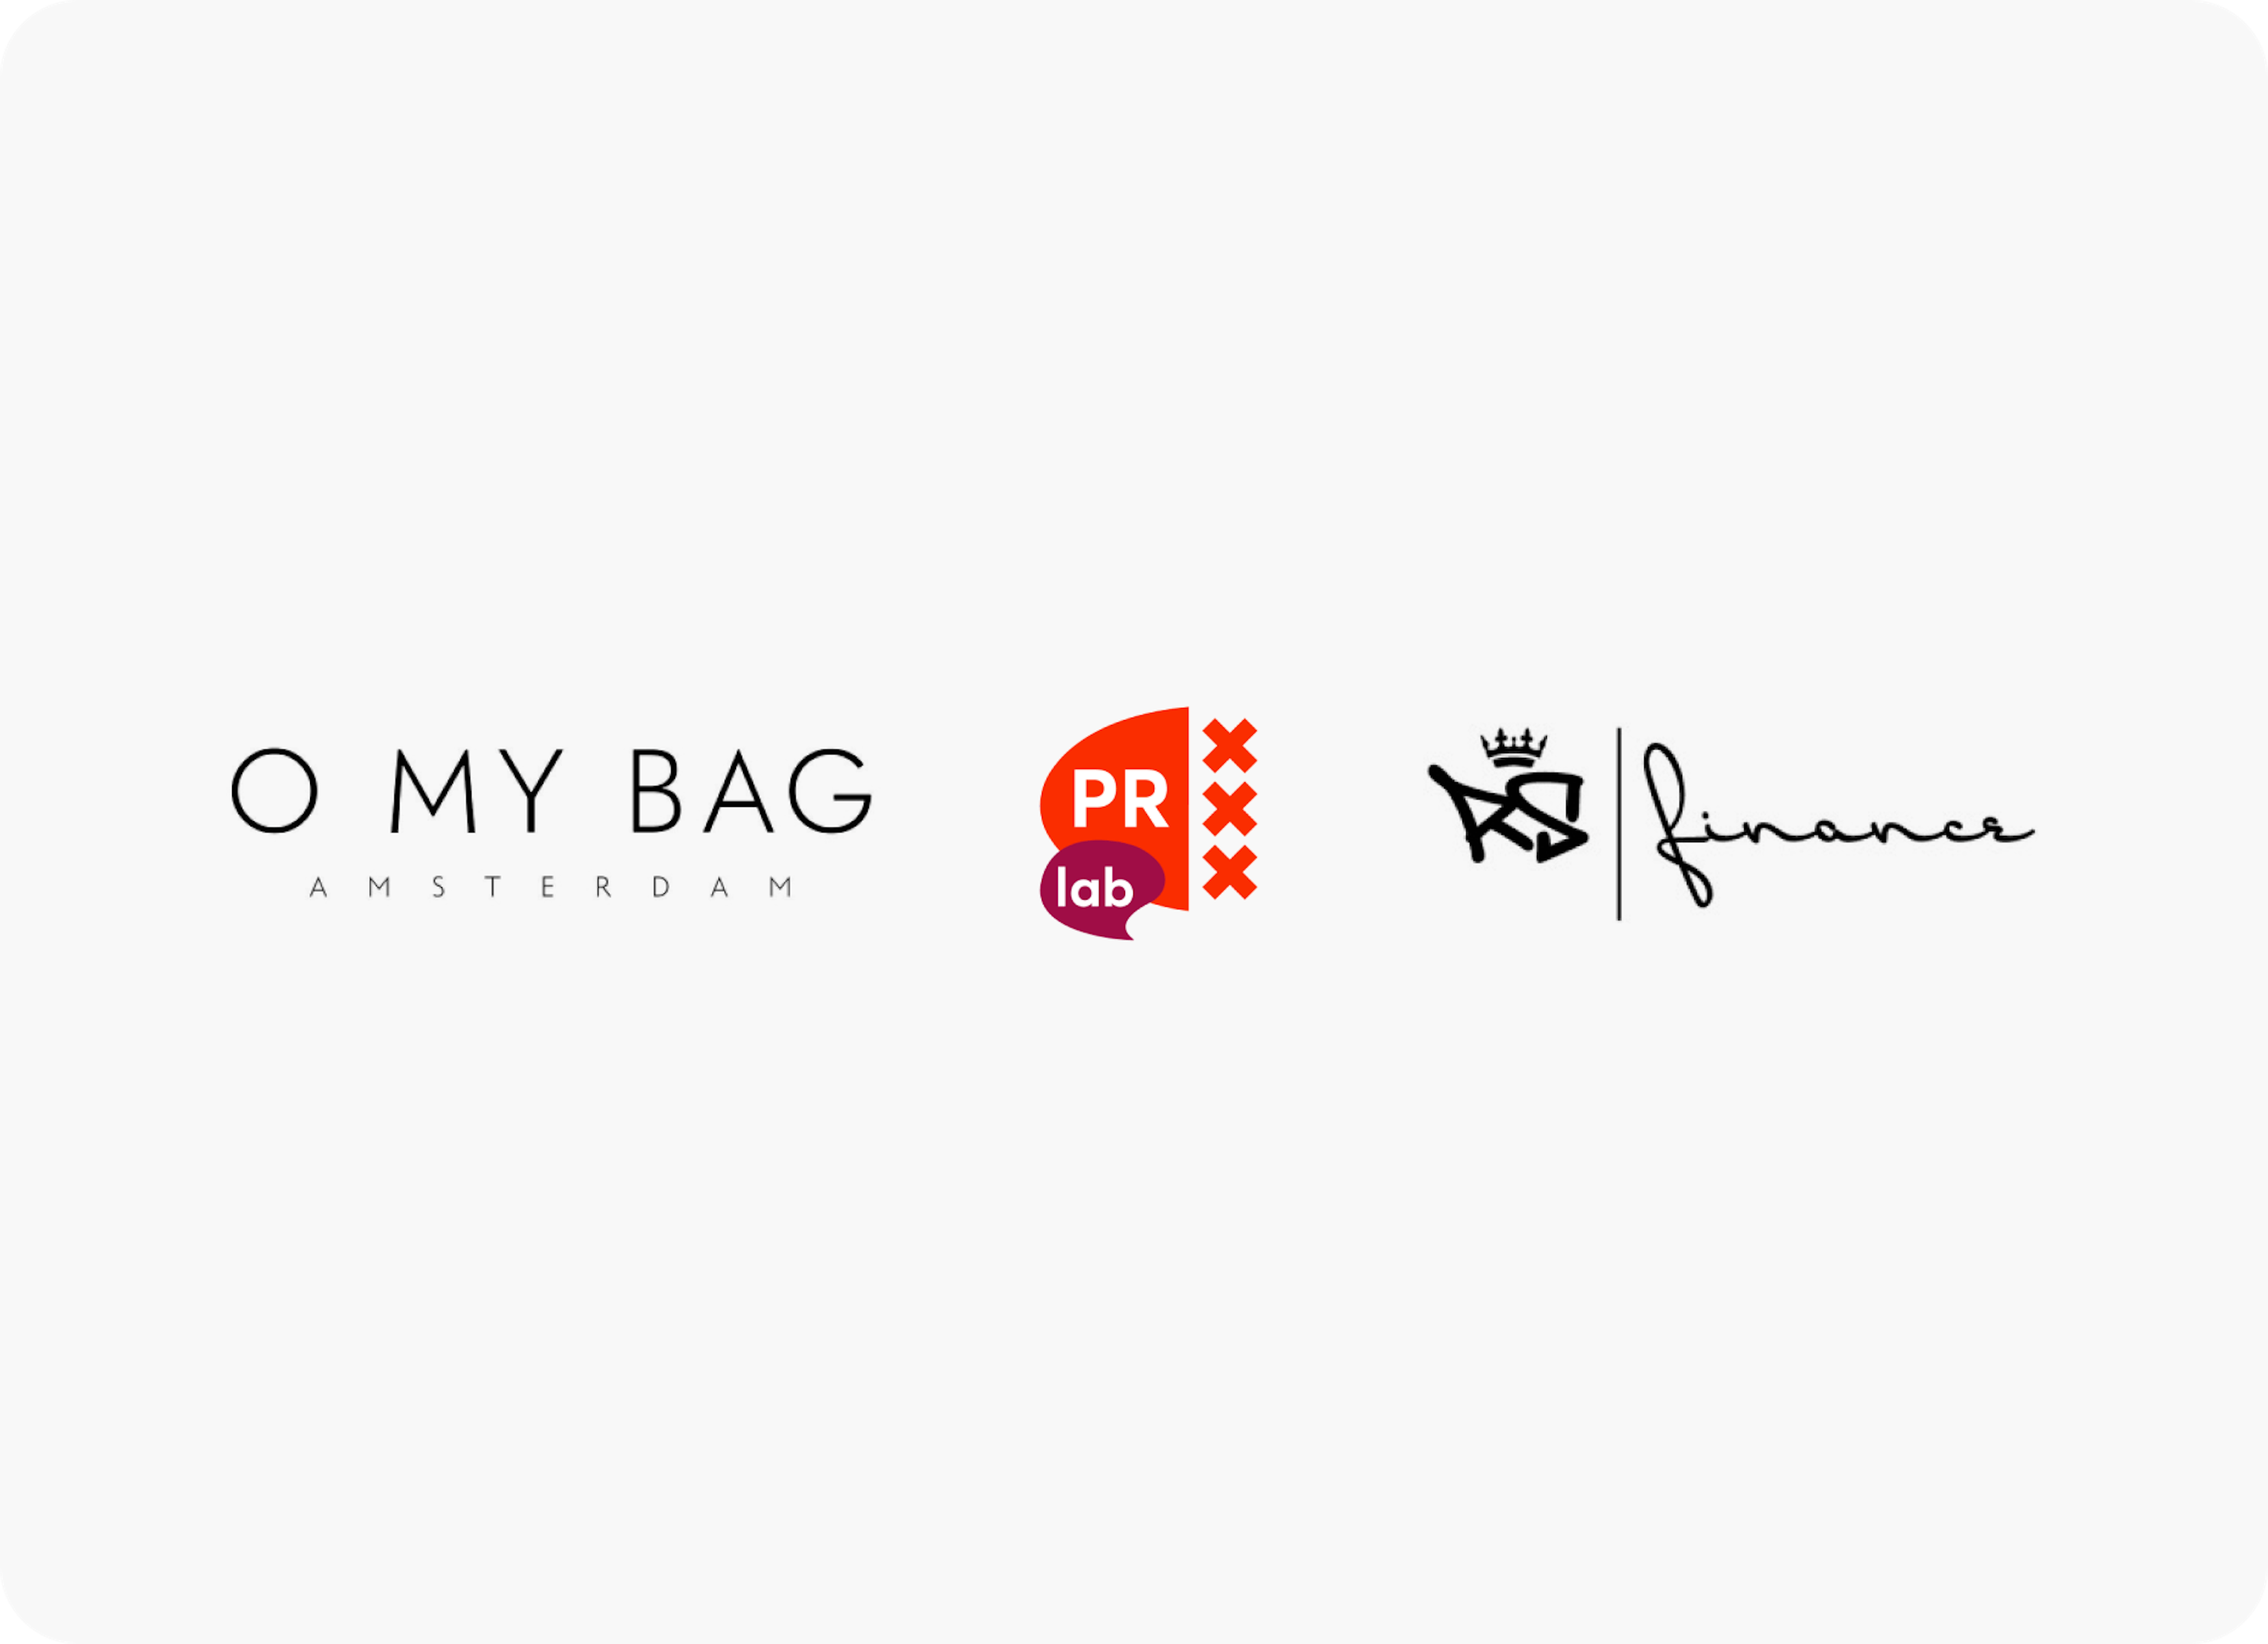 O my bag, PRLab and RS Finance